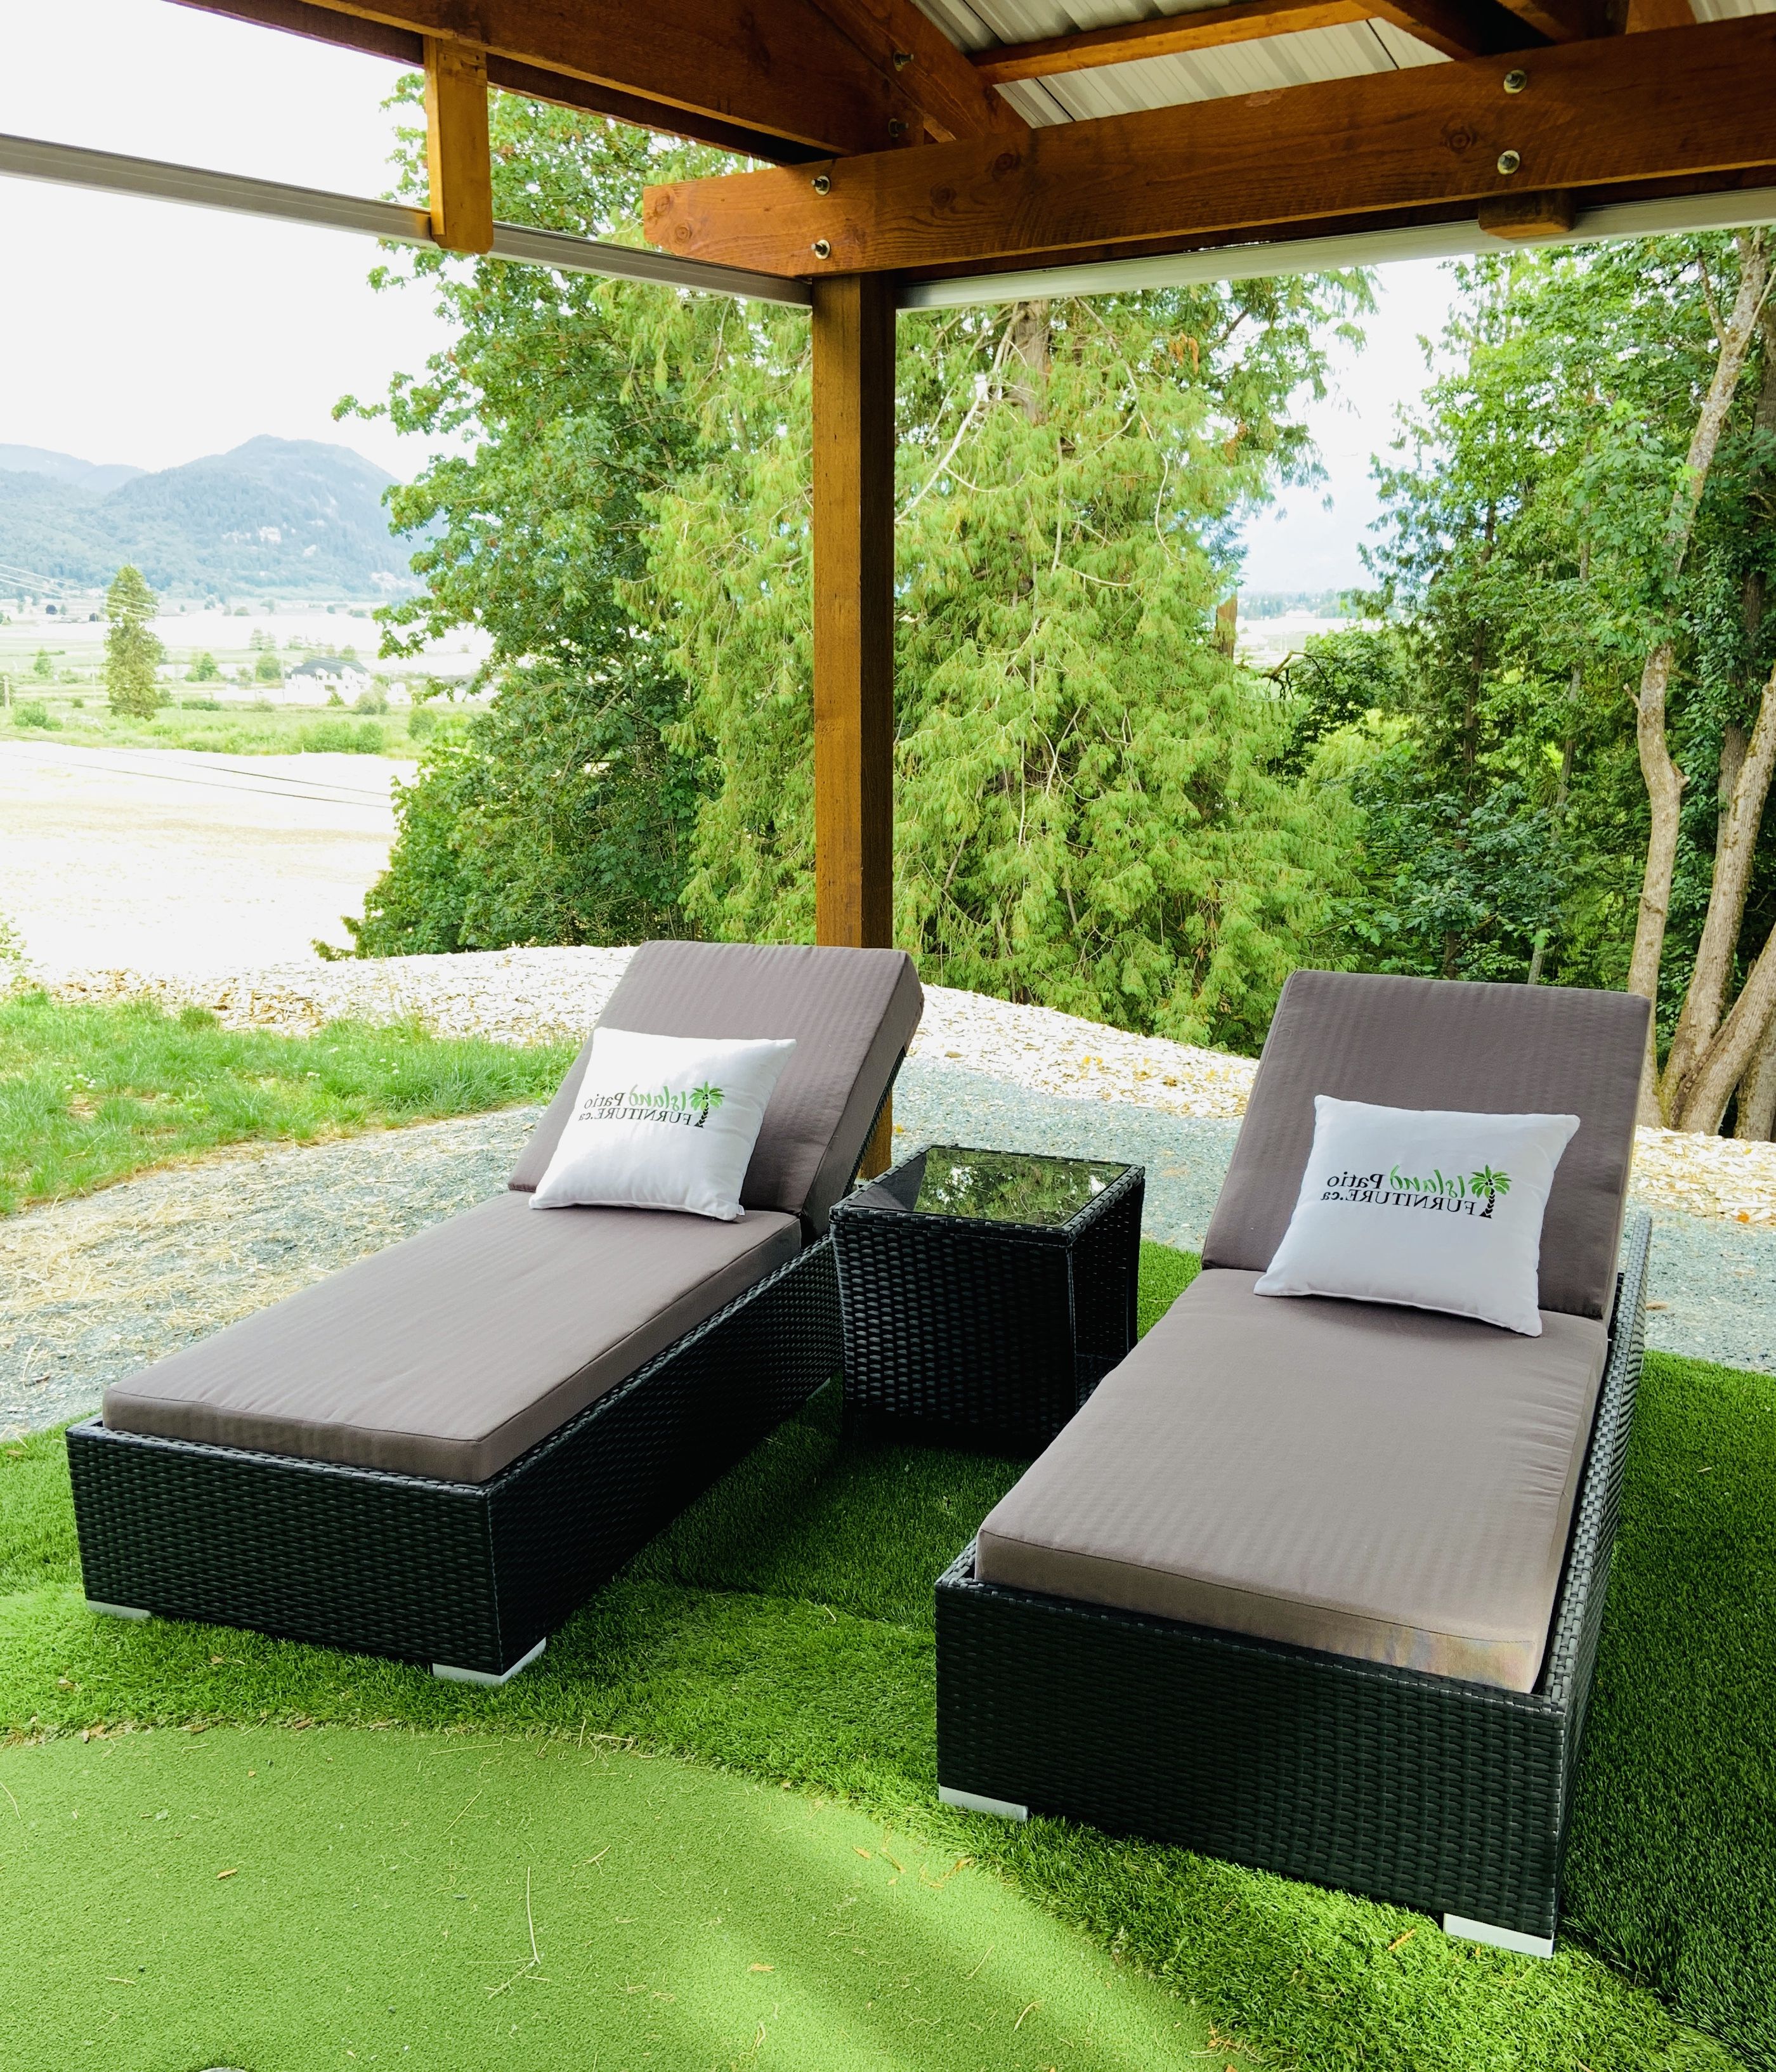 3 Pc Reclining Loungers And End Table Set For 2019 Outdoor 3 Piece Chaise Lounger Sets With Table (View 20 of 25)